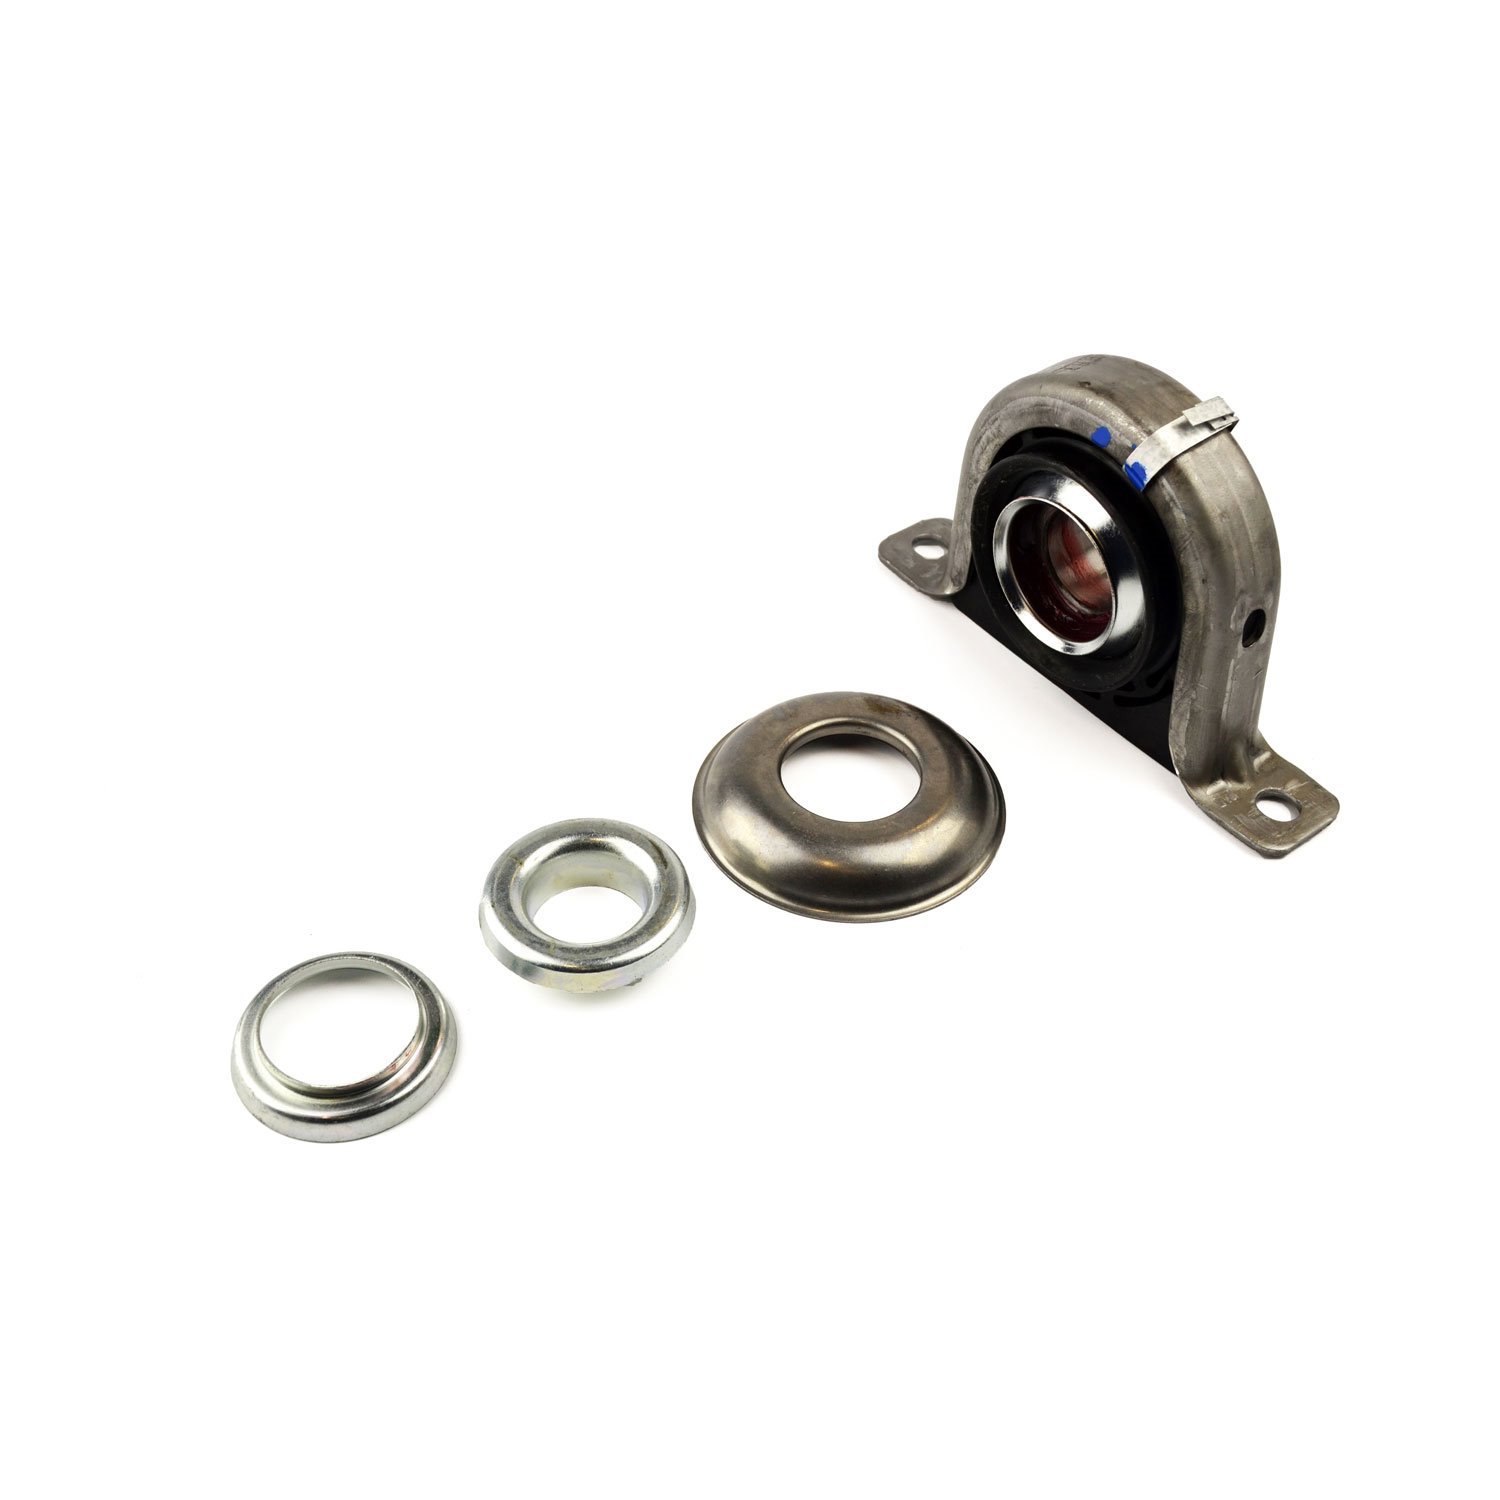 Center Support Bearing ID (A) = 1.378"